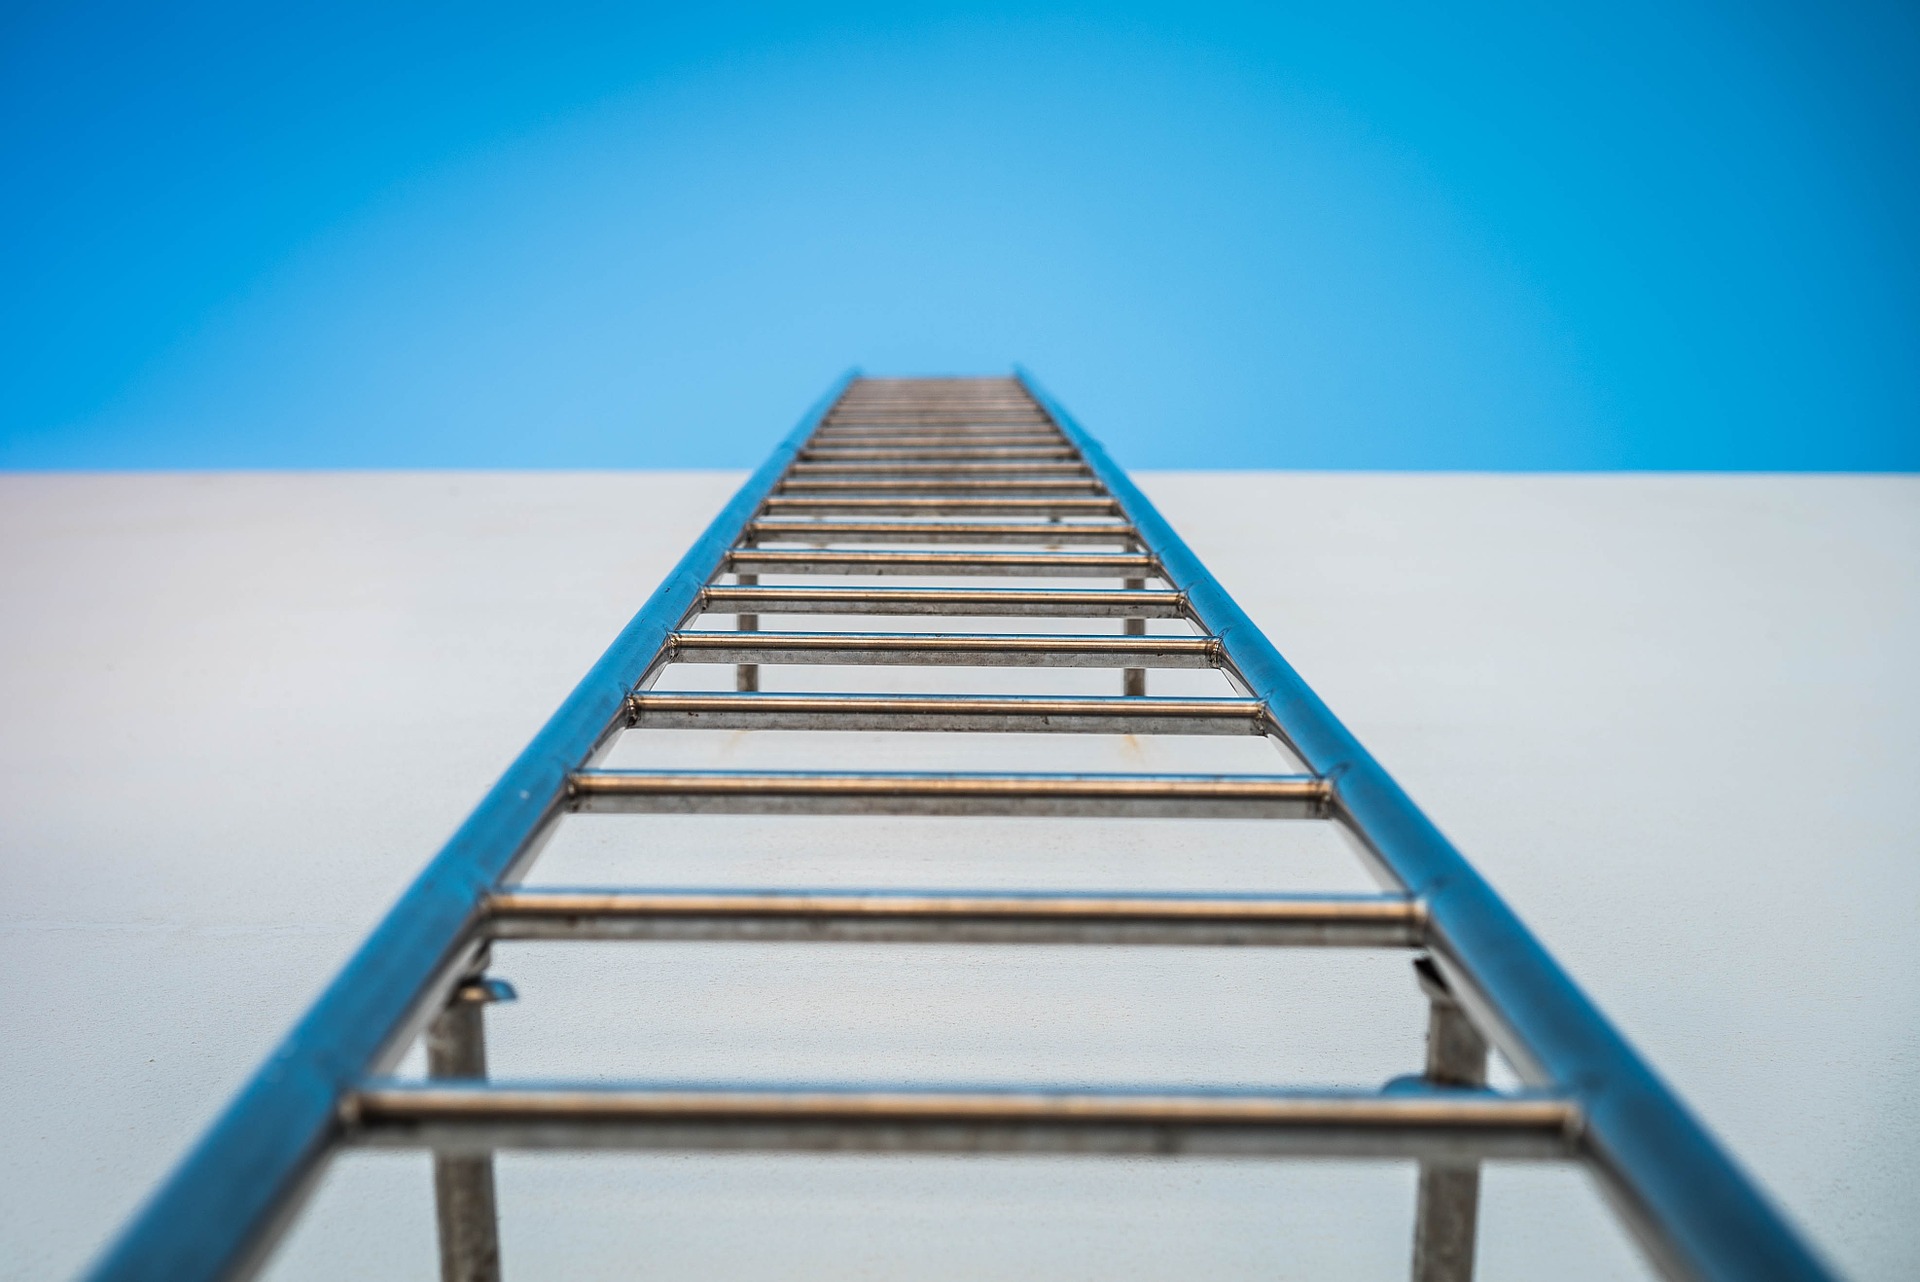 Jon Boat Ladder: How to Choose and What’s Best